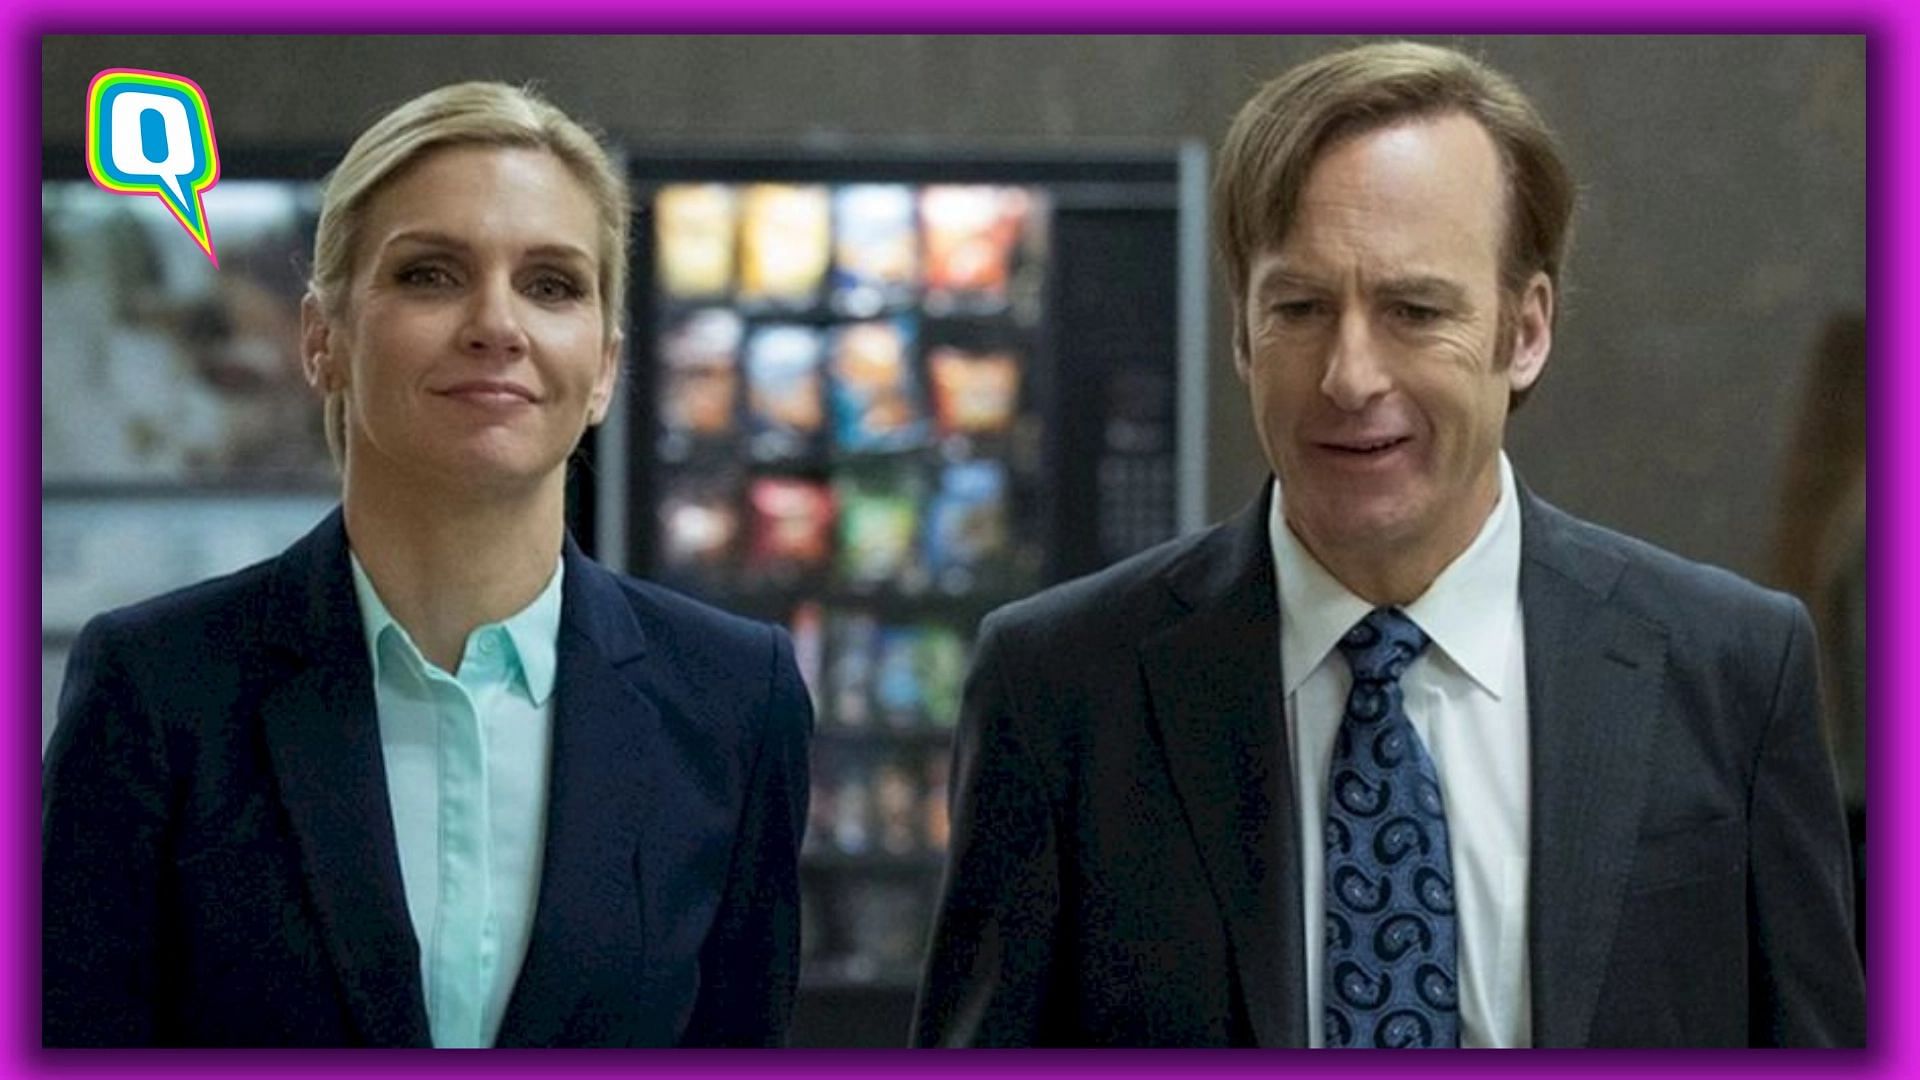 <div class="paragraphs"><p>Rhea Seehorn and Bob Odenkirk in a still from <em>Better Call Saul.</em></p><p>Emmys 2022 snubbed <em>Better Call Saul</em> and many other shows. Here's why.</p></div>